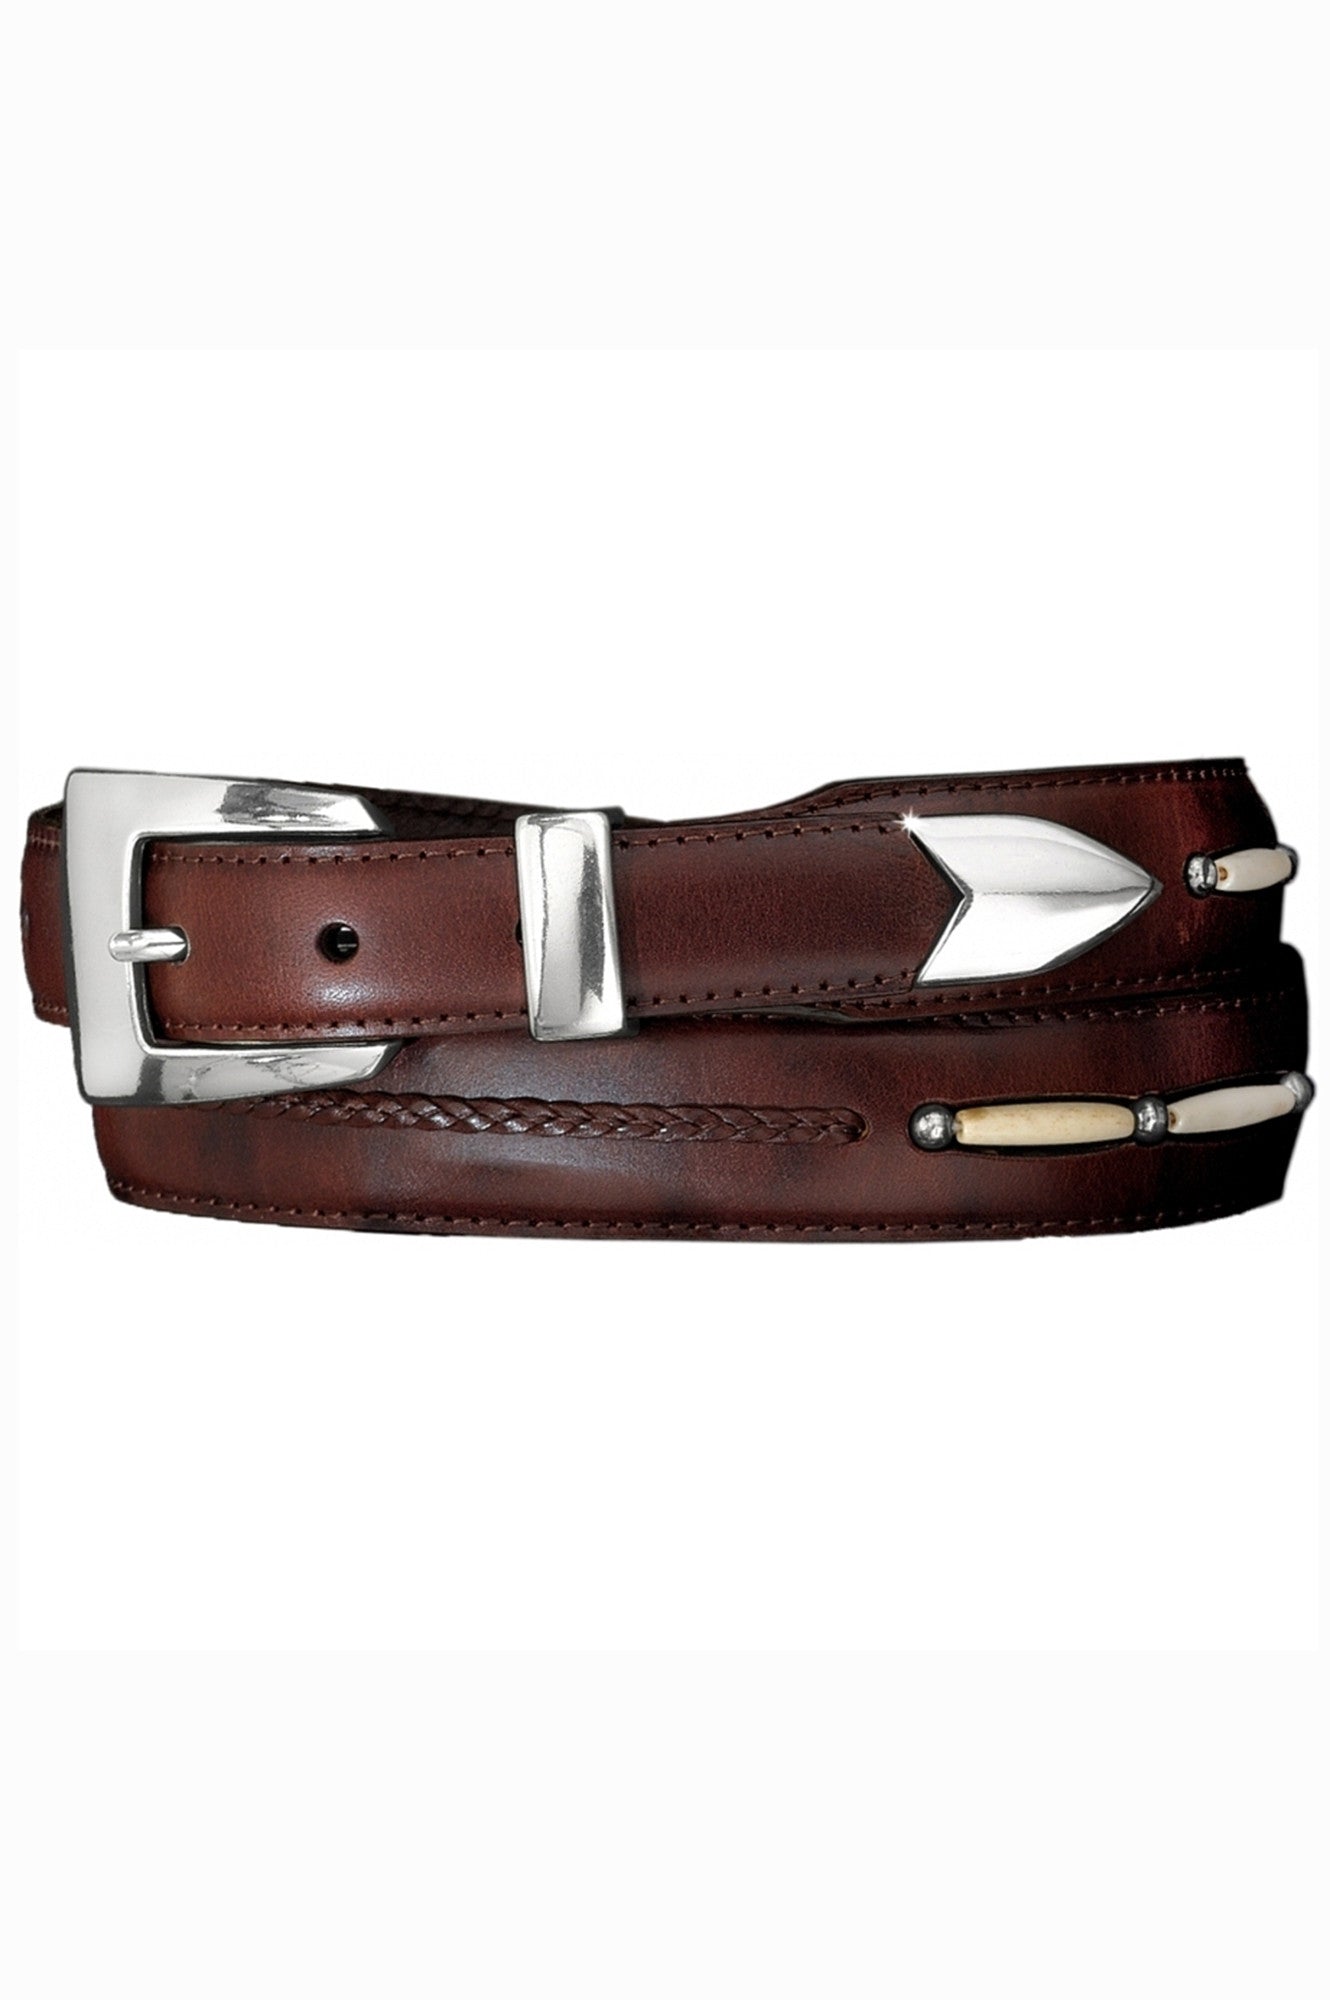 brown leather, mens belts, leather belts, brighton belts, western style leather belt, mens leather belts, brighton leather belts, western style